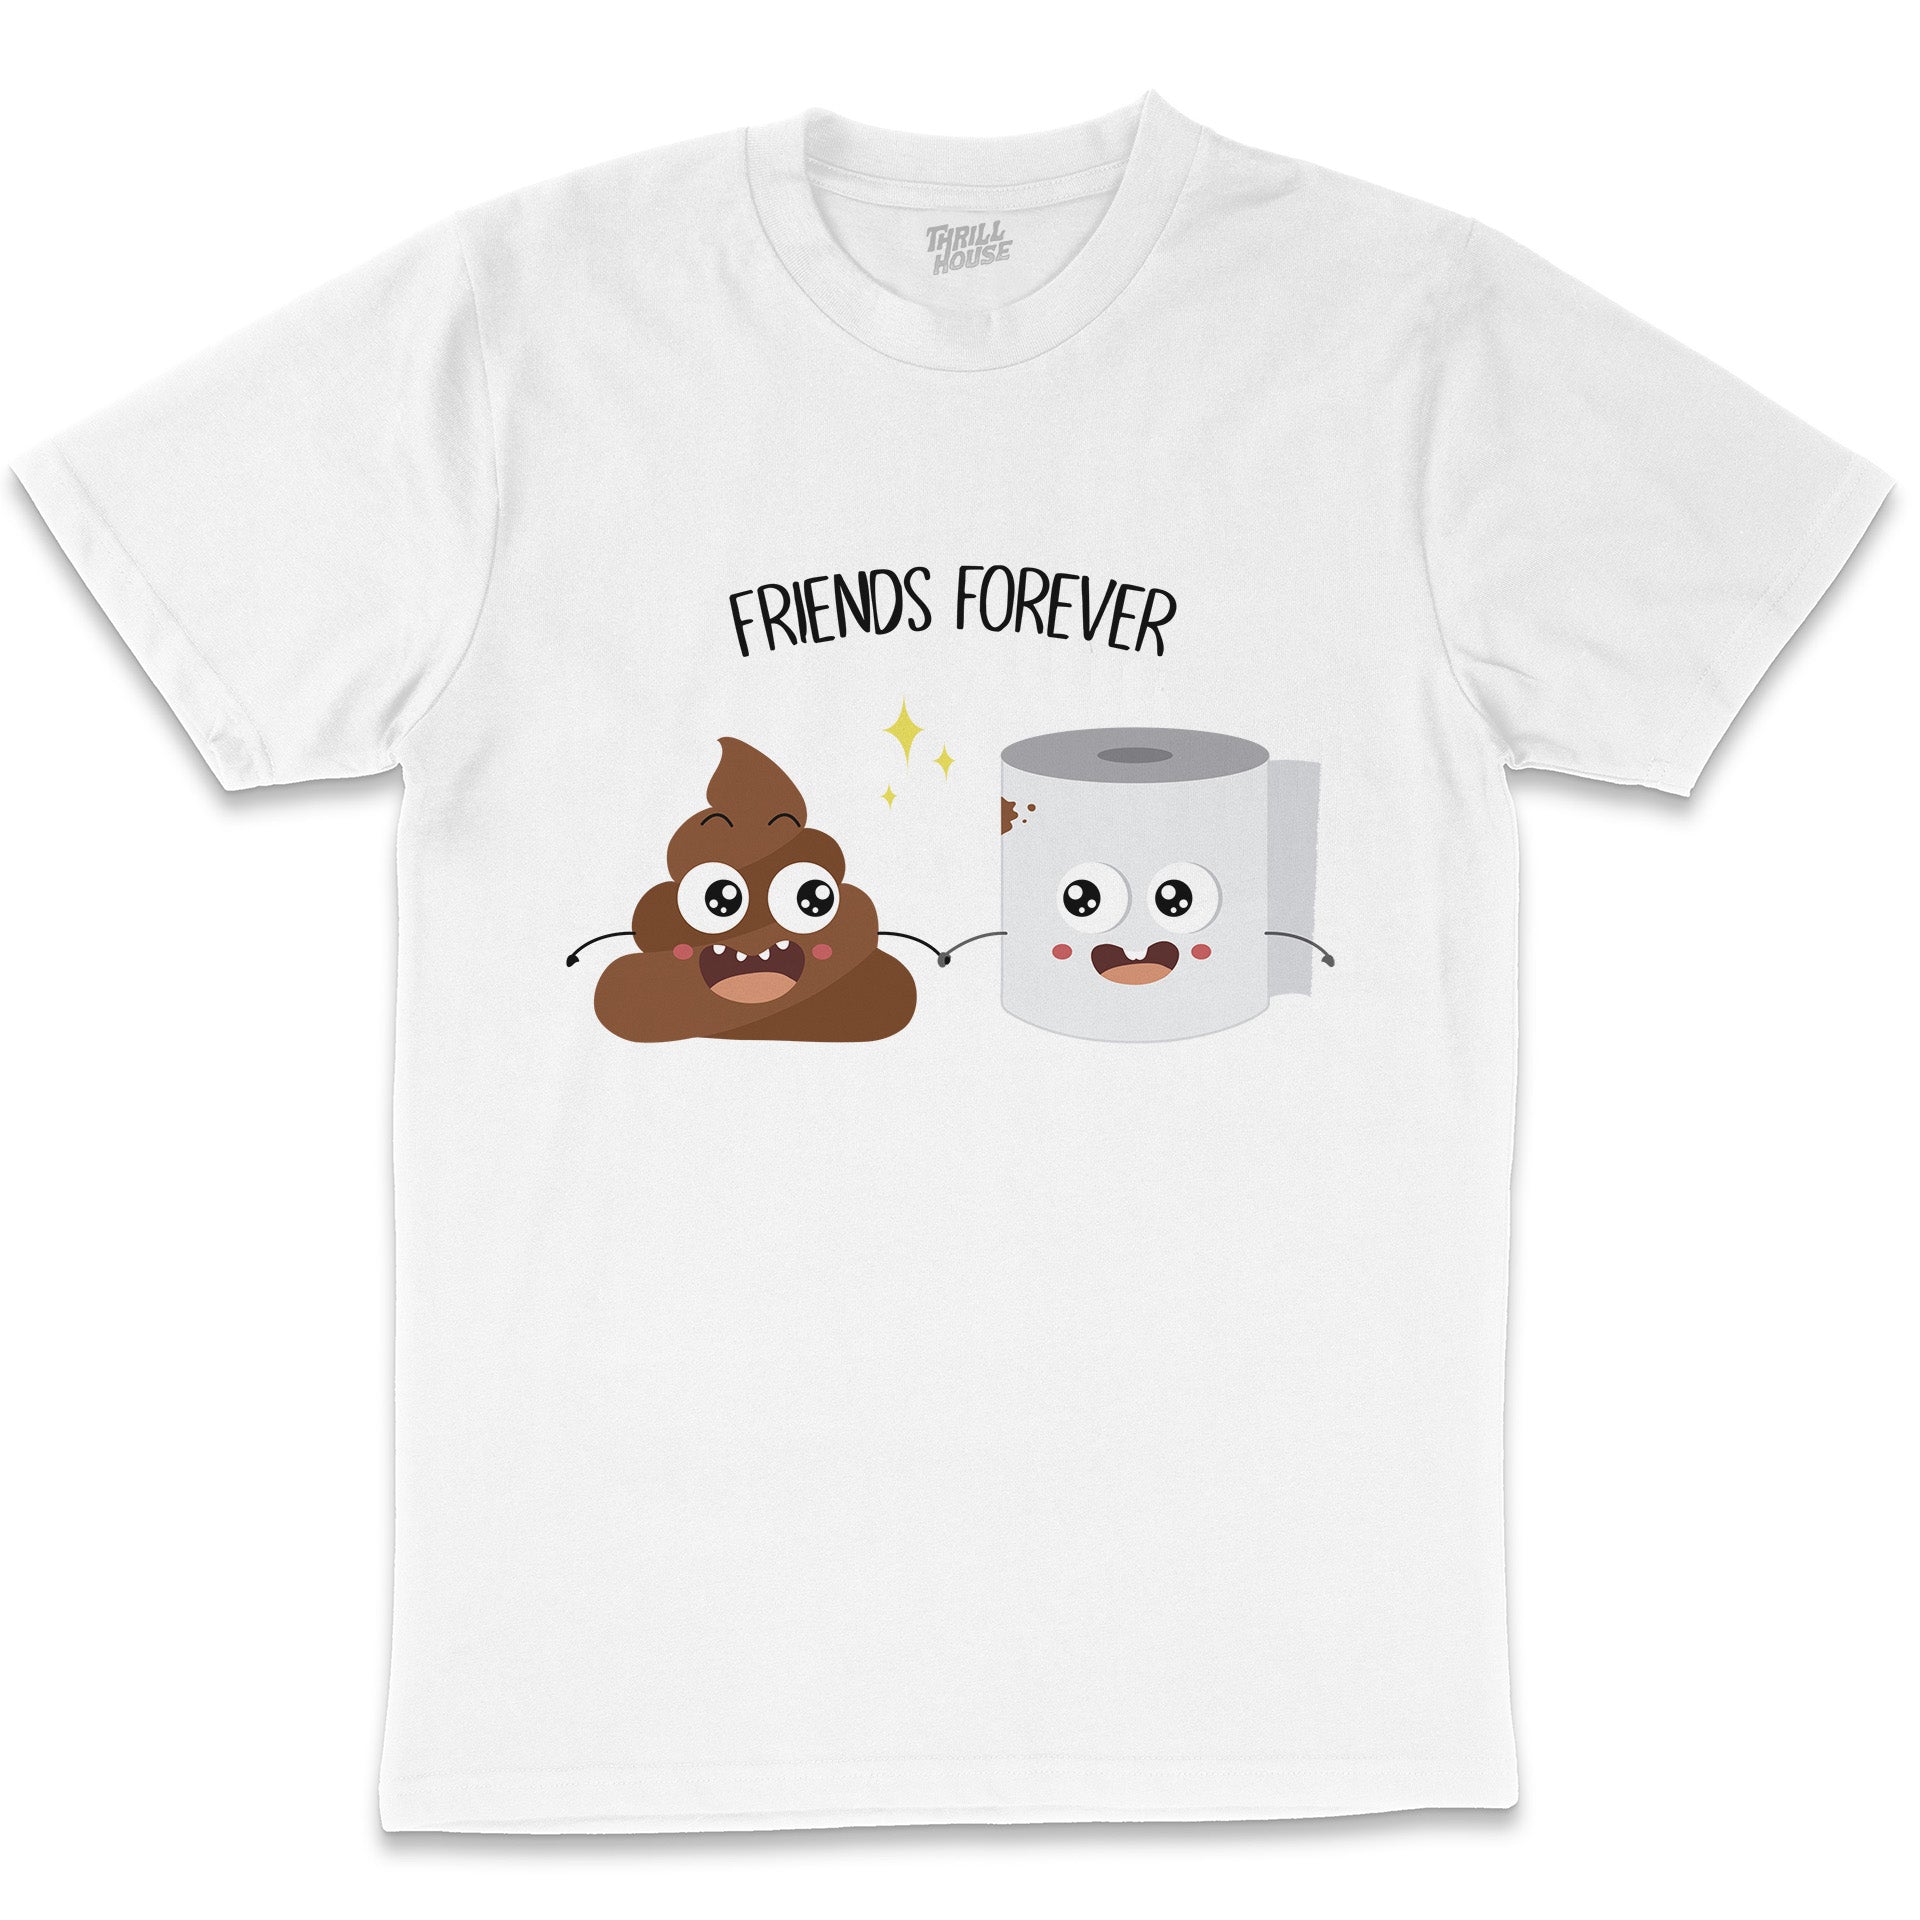 Poo and Paper Funny Toilet Paper Joke Crude Rude Bathroom Humour Cotton T-Shirt